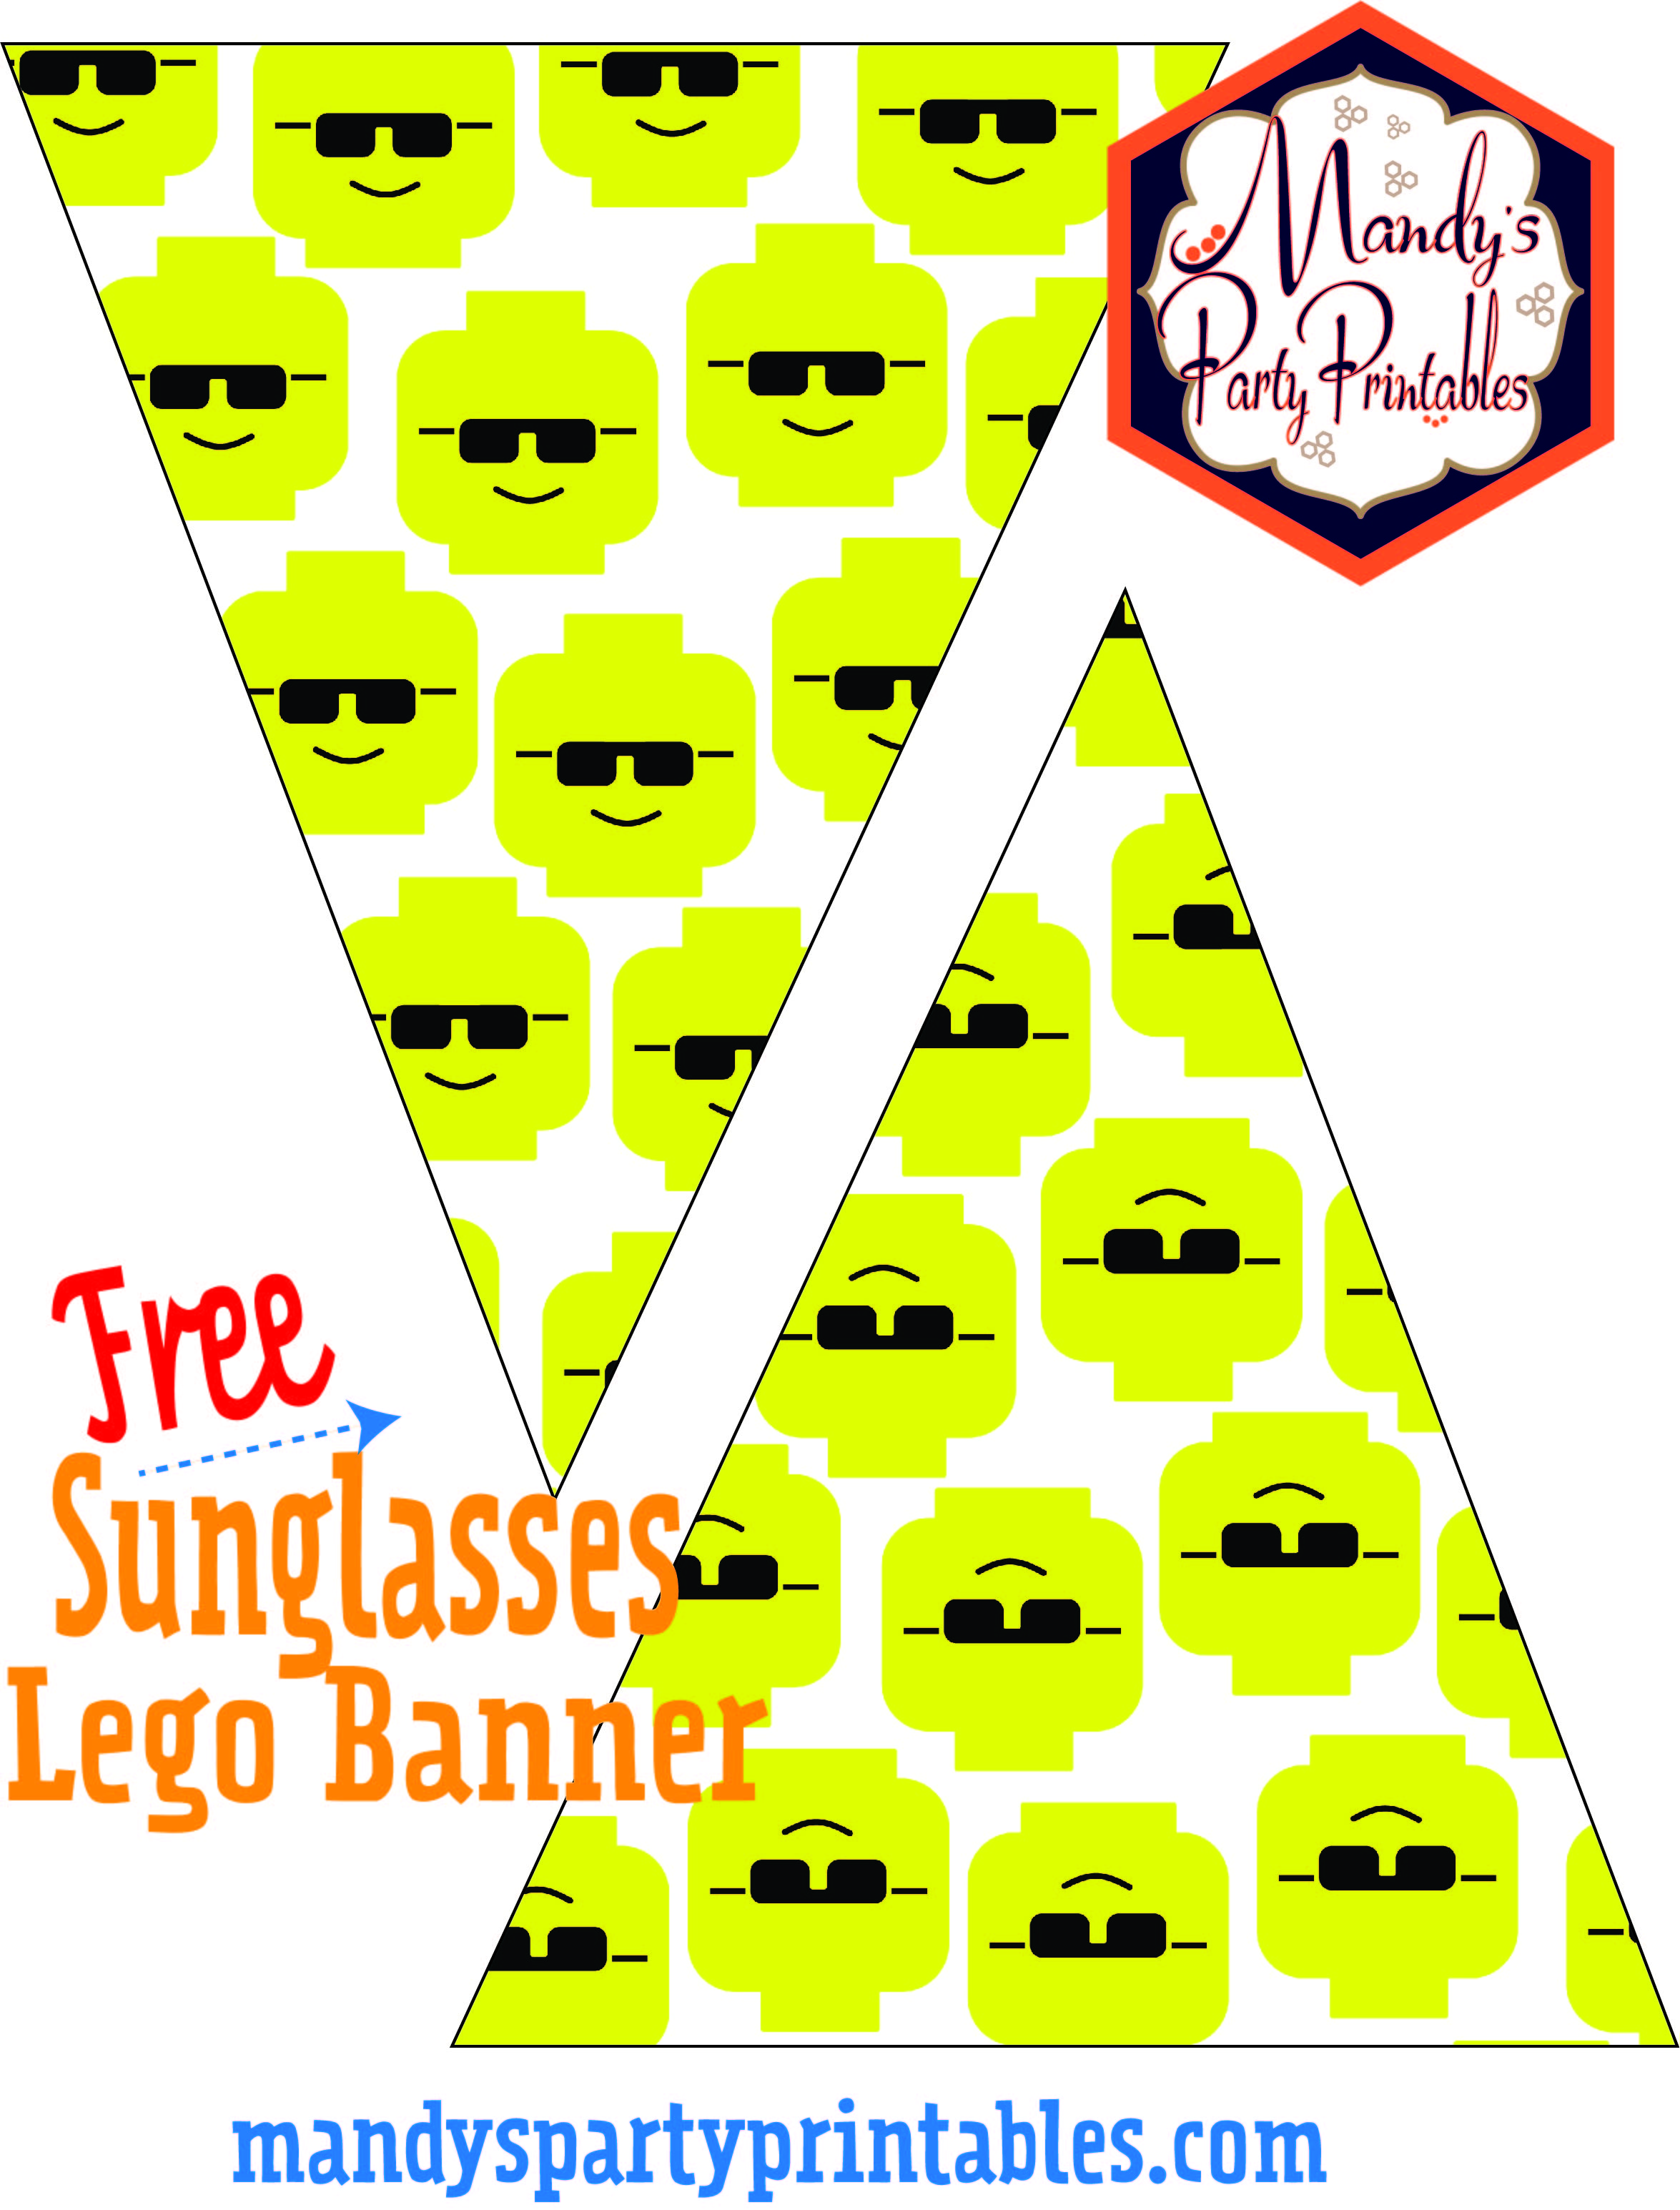 Two to a sheet | Triangle banner with Lego dude sporting sunglasses | Mandy's Party Printables